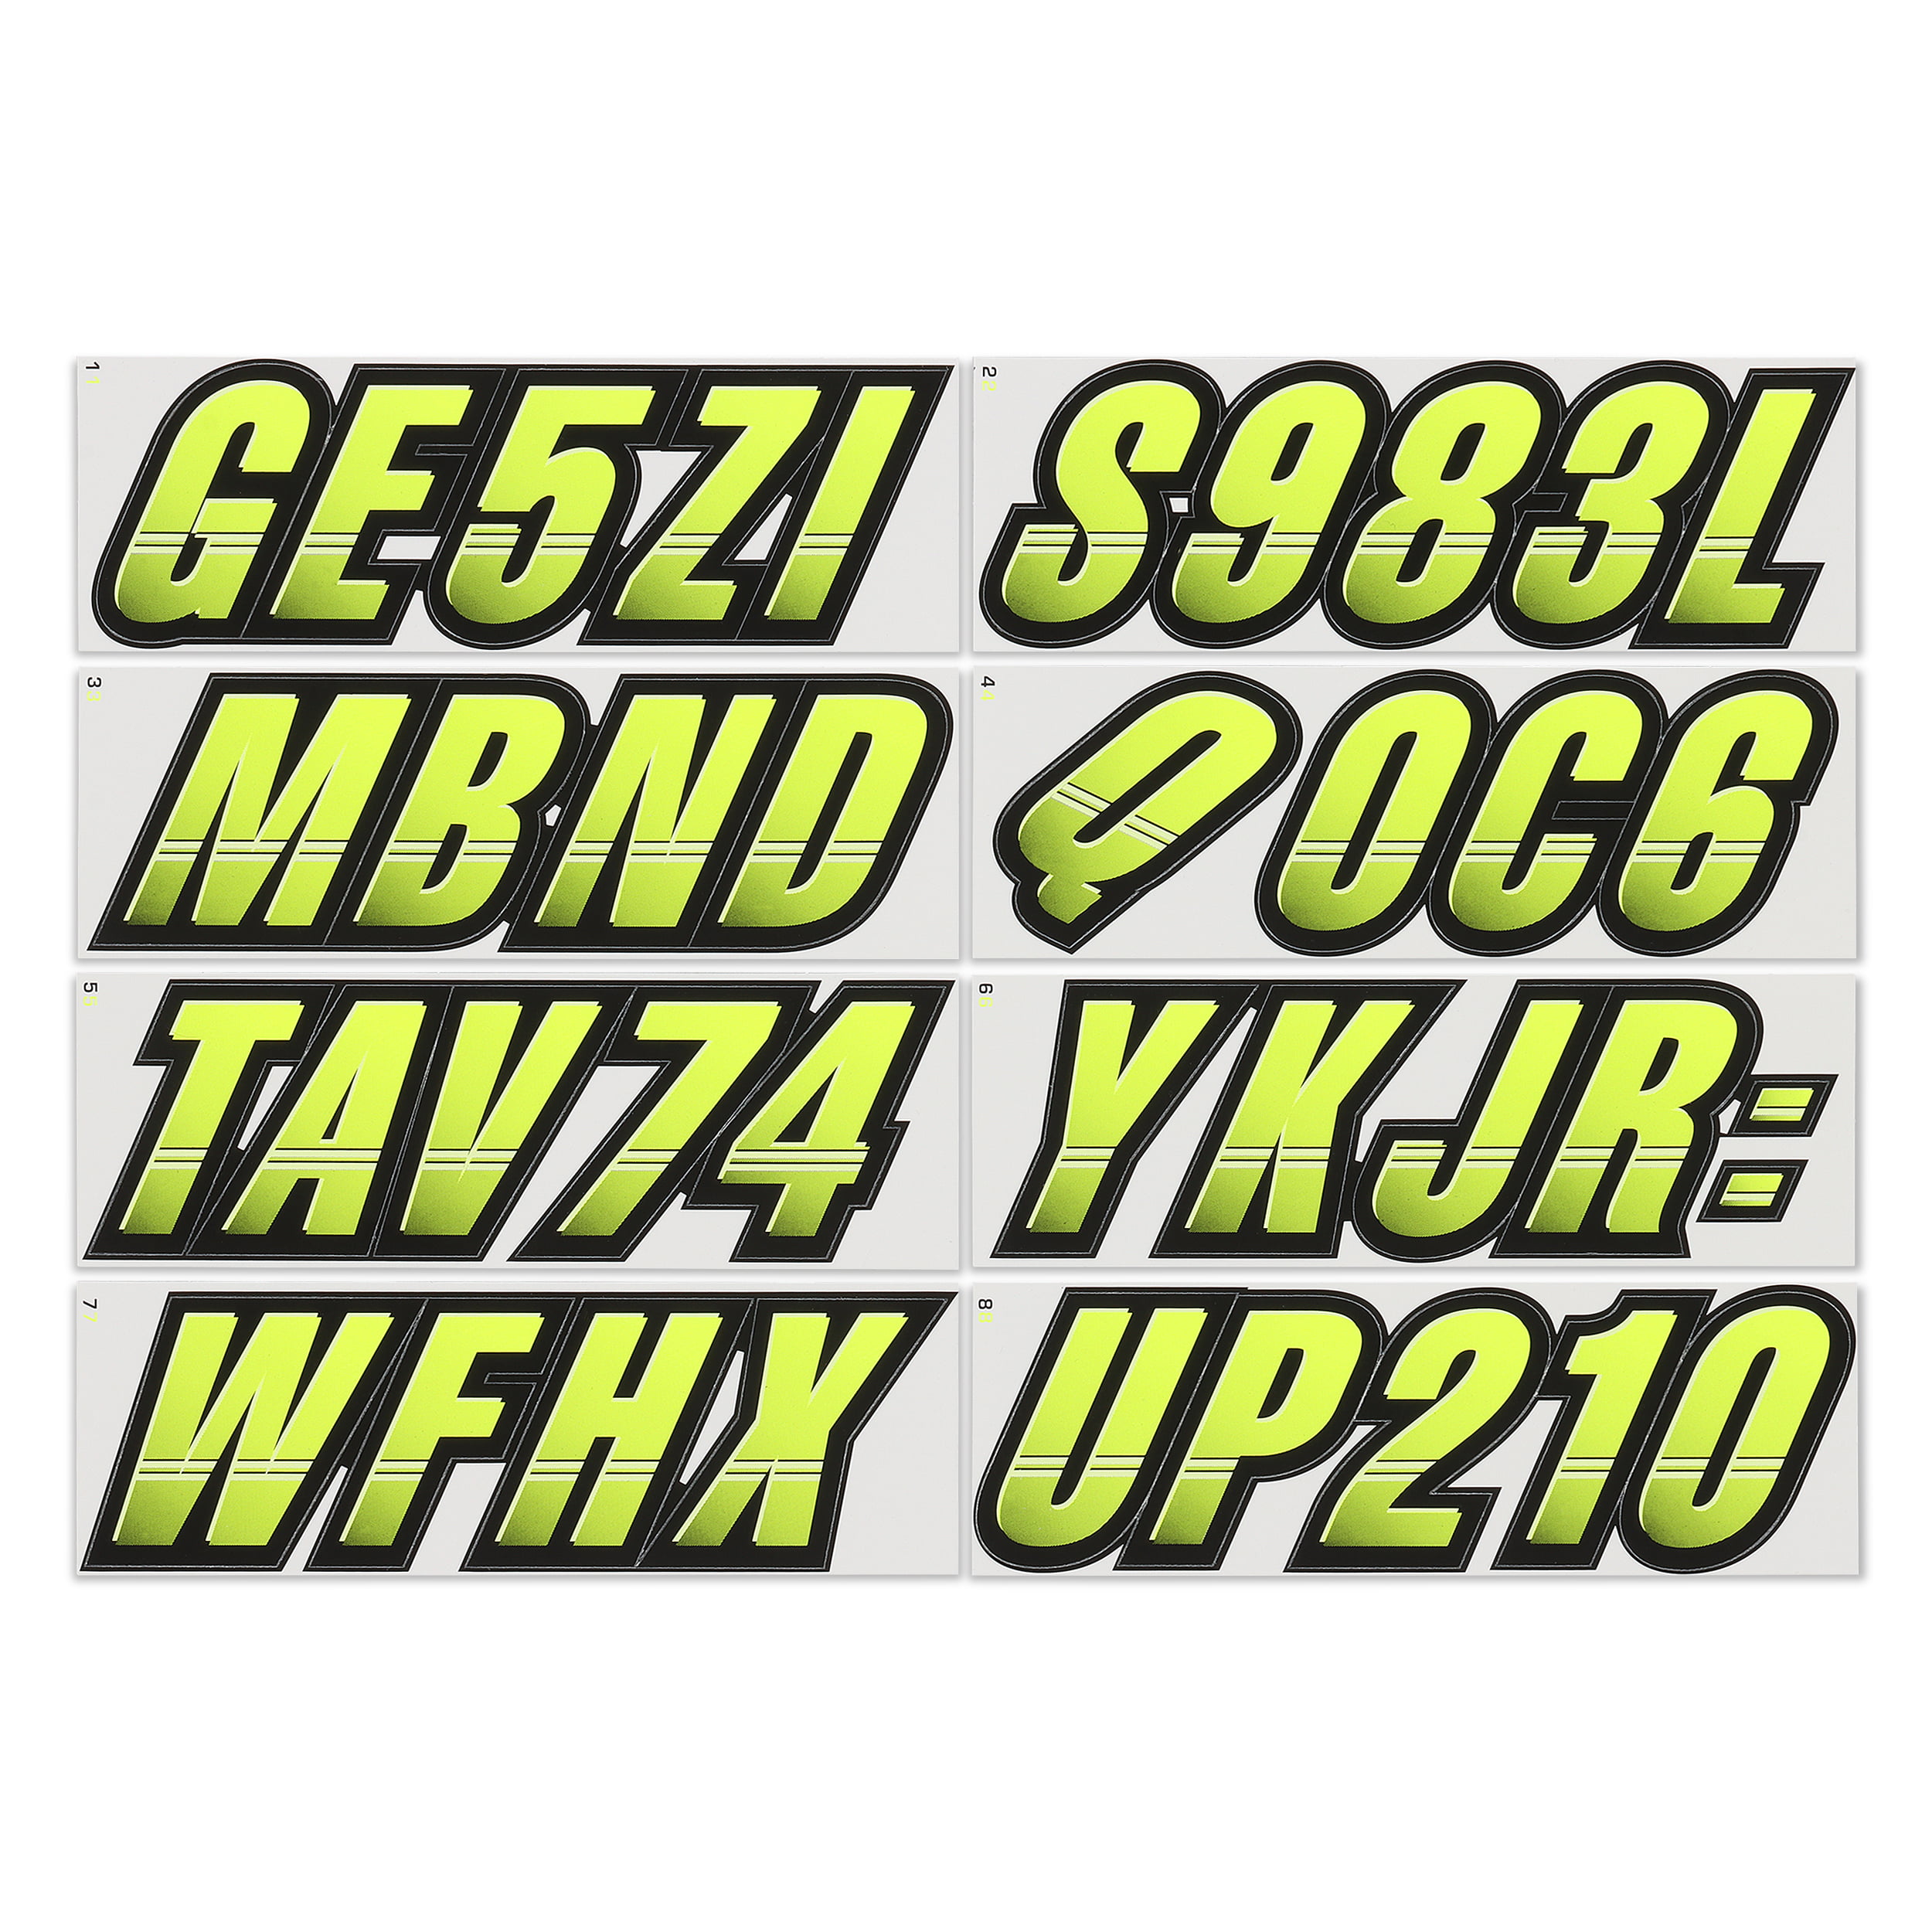 Atomic Green / Black Stiffie TECHTRON 3 Alpha-Numeric Registration Identification Numbers Stickers Decals for Boats & Personal Watercraft 